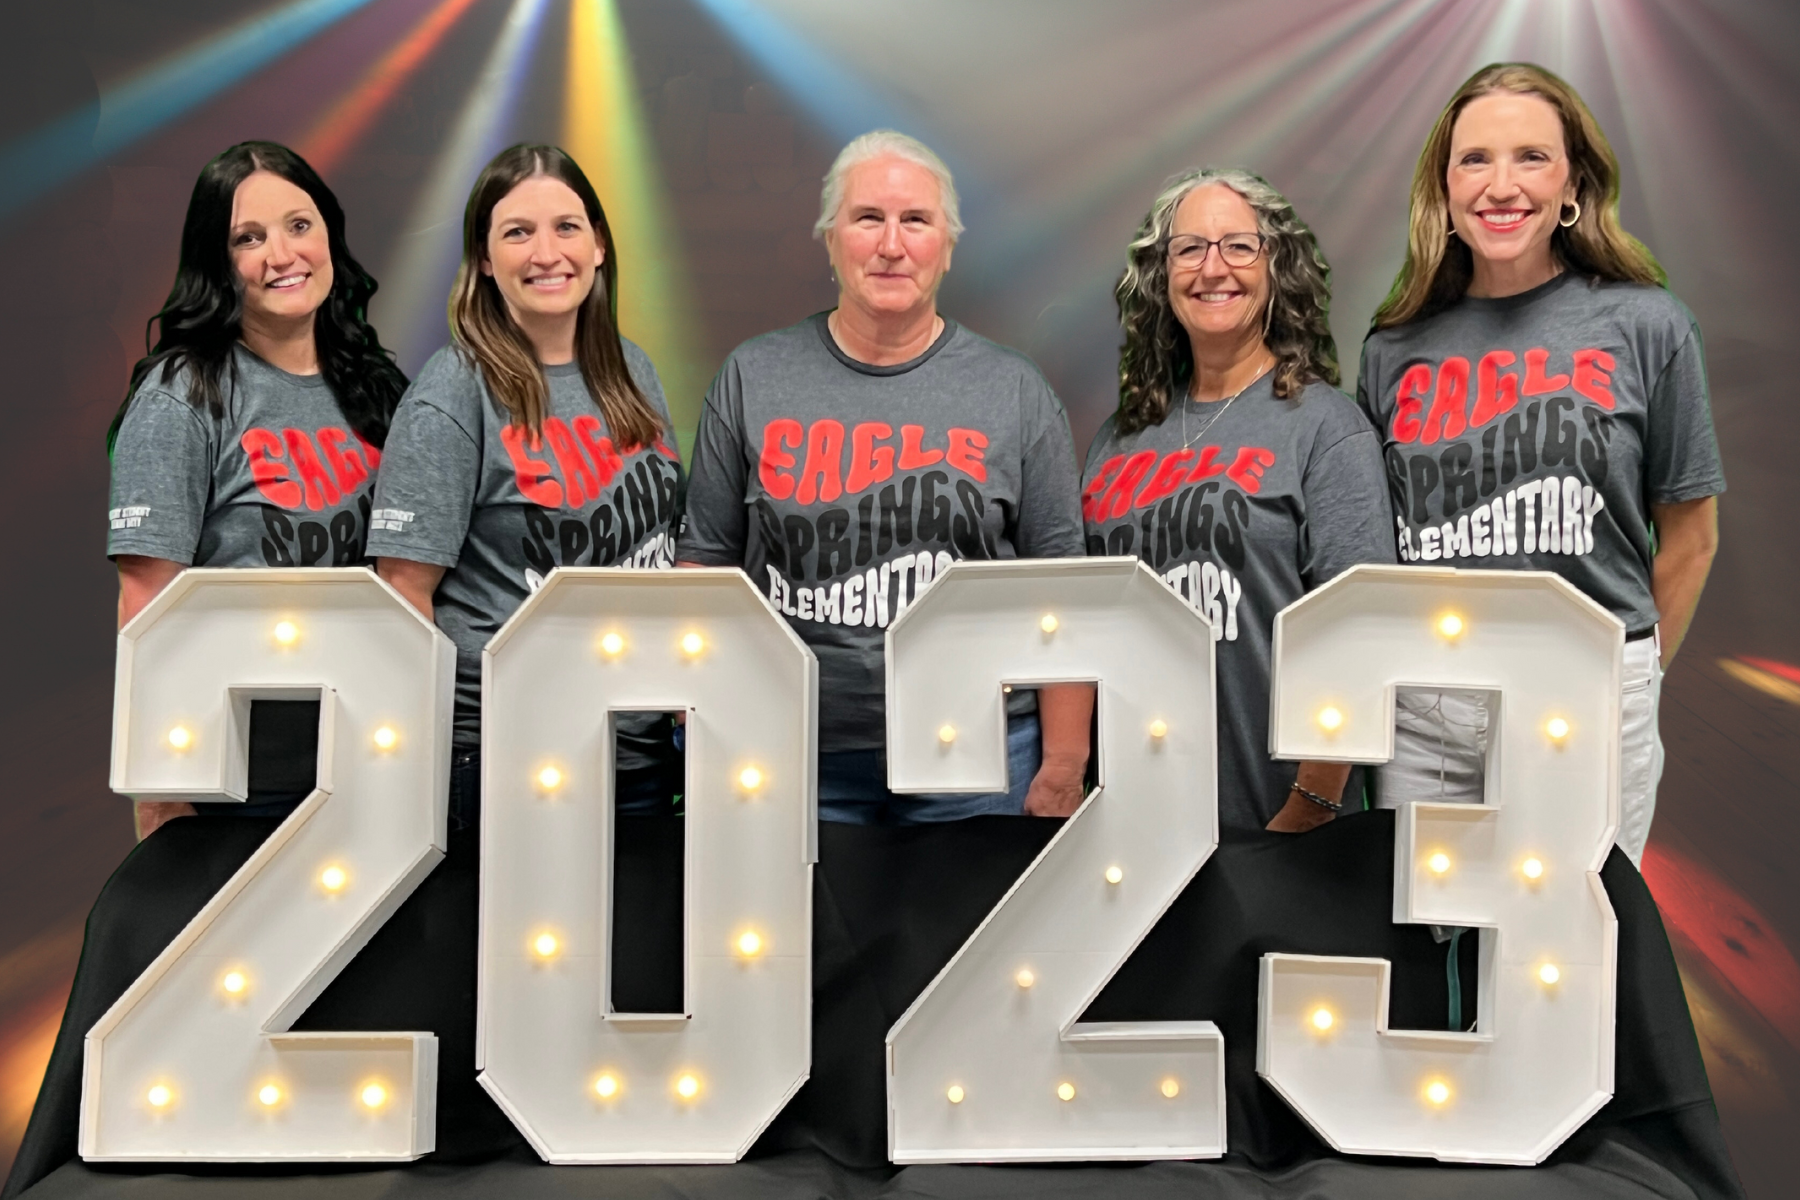 group of teachers in gray shirts standing posing behind lighted 2023 numbers